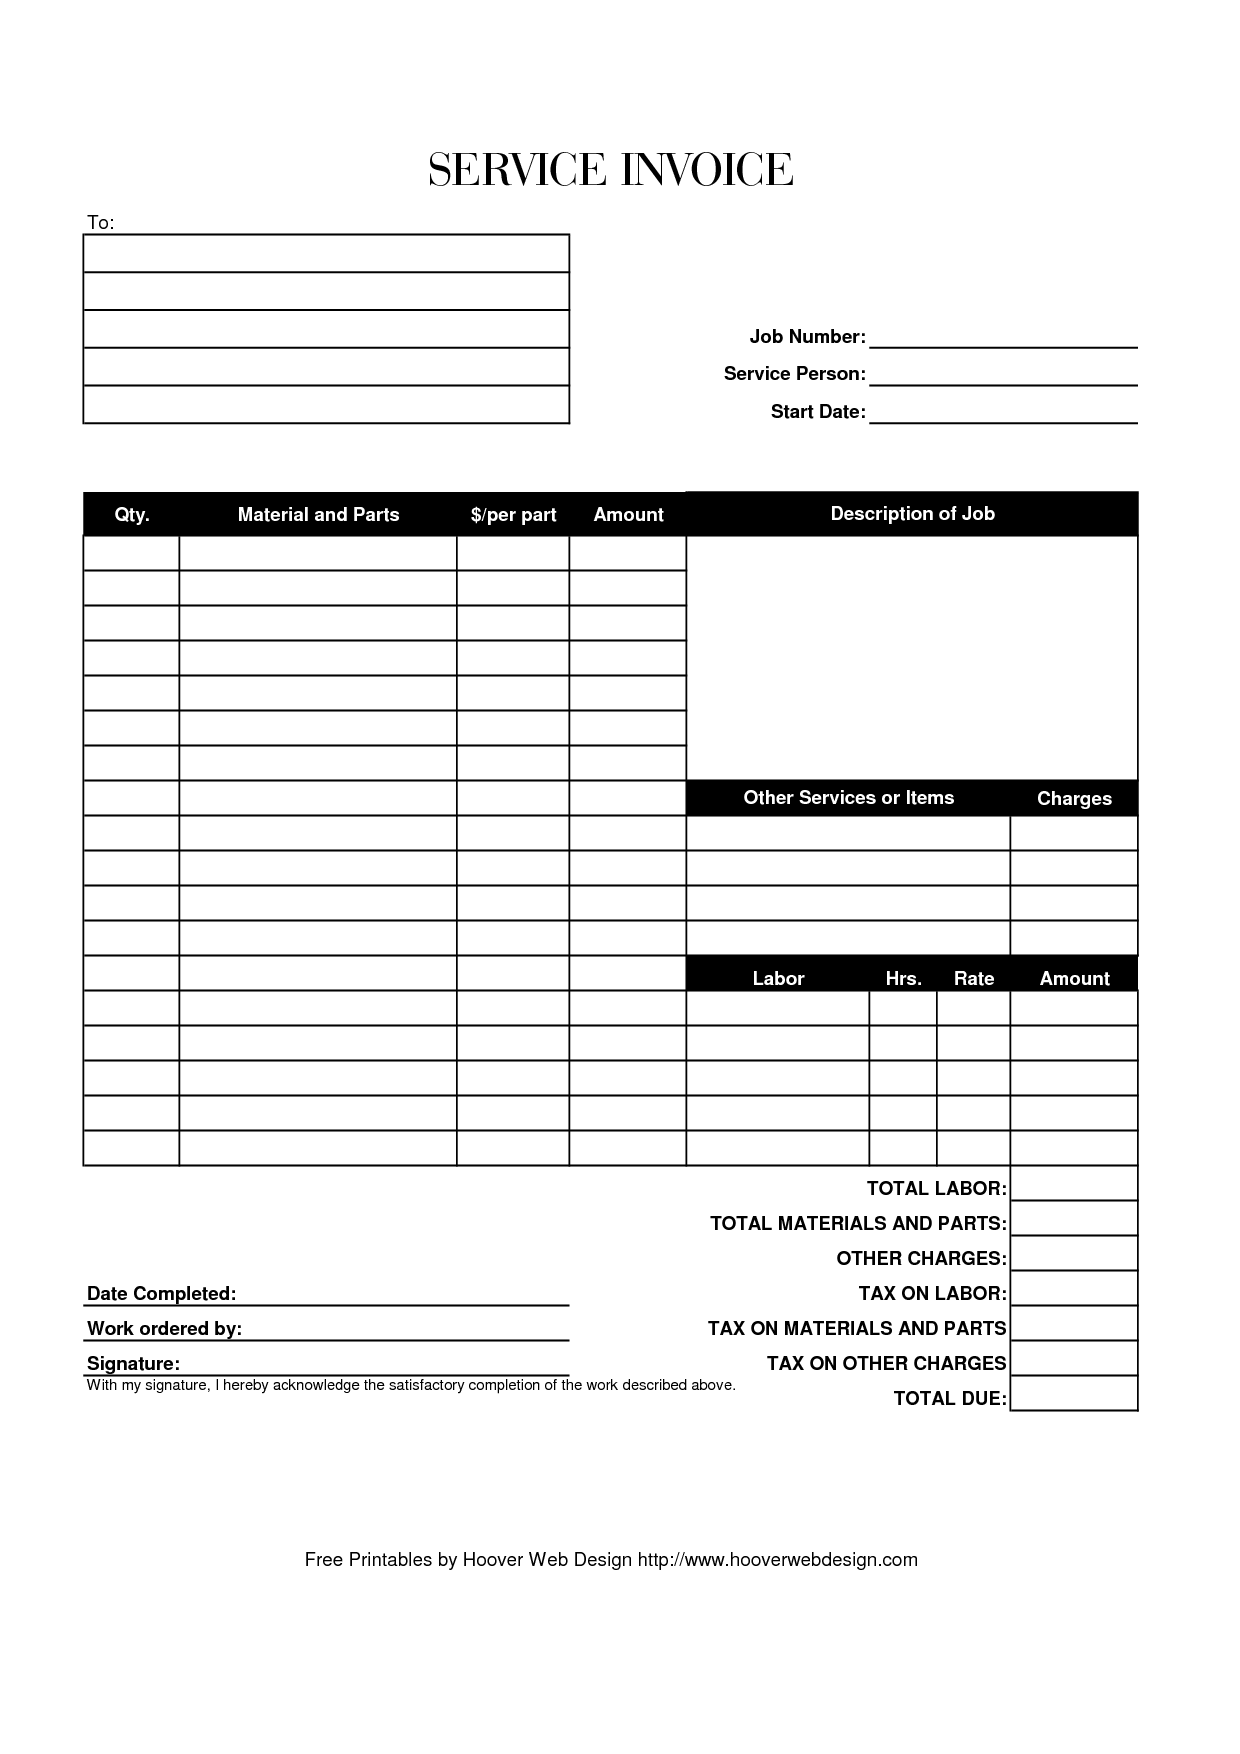 18 Customize Our Free Blank Billing Invoice Template Pdf Photo for Blank Billing Invoice Template Pdf